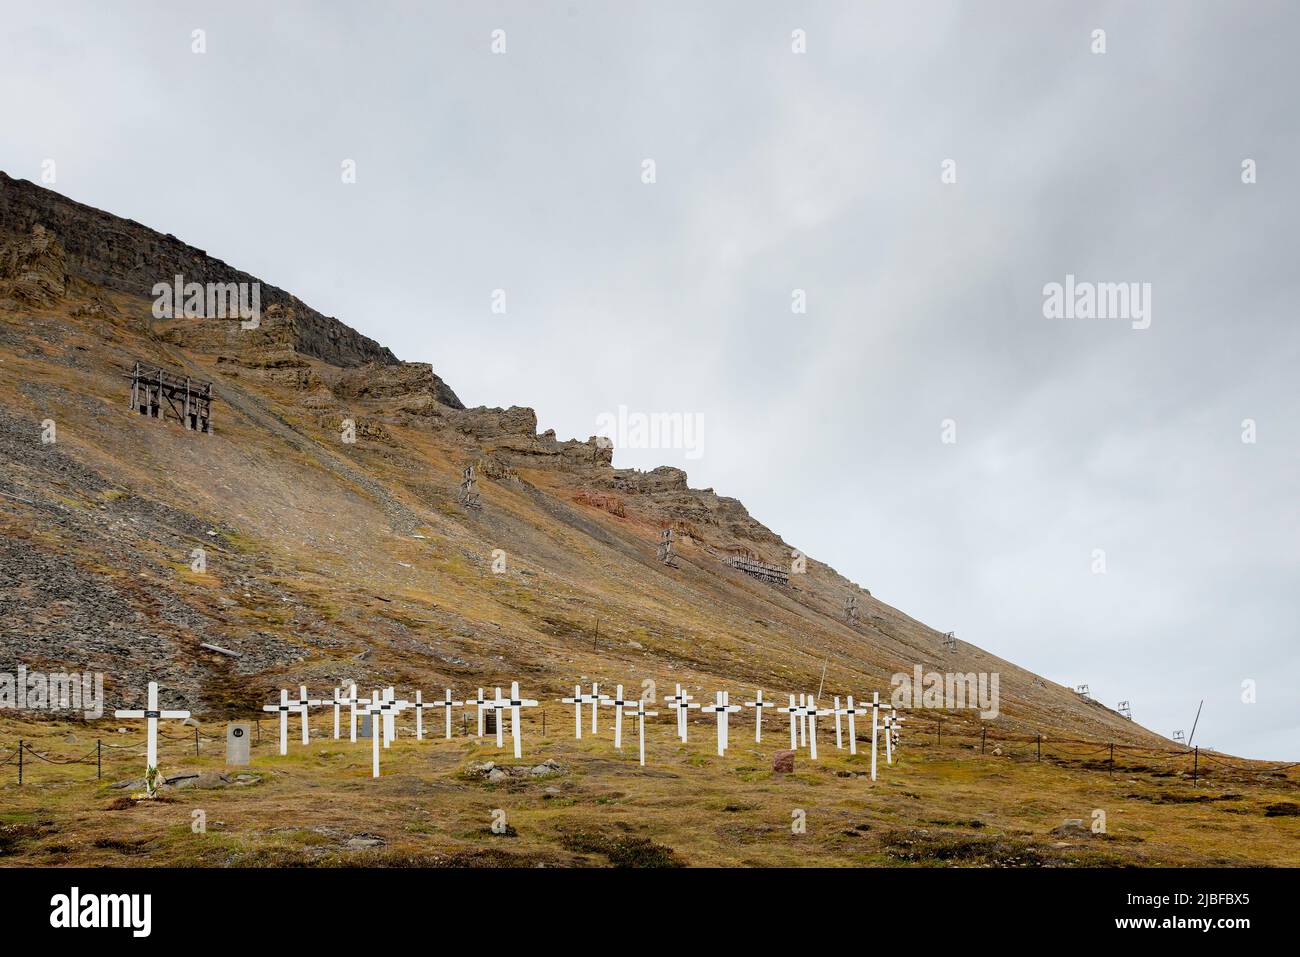 Grave markers by hill in Svalbard, Norway Stock Photo